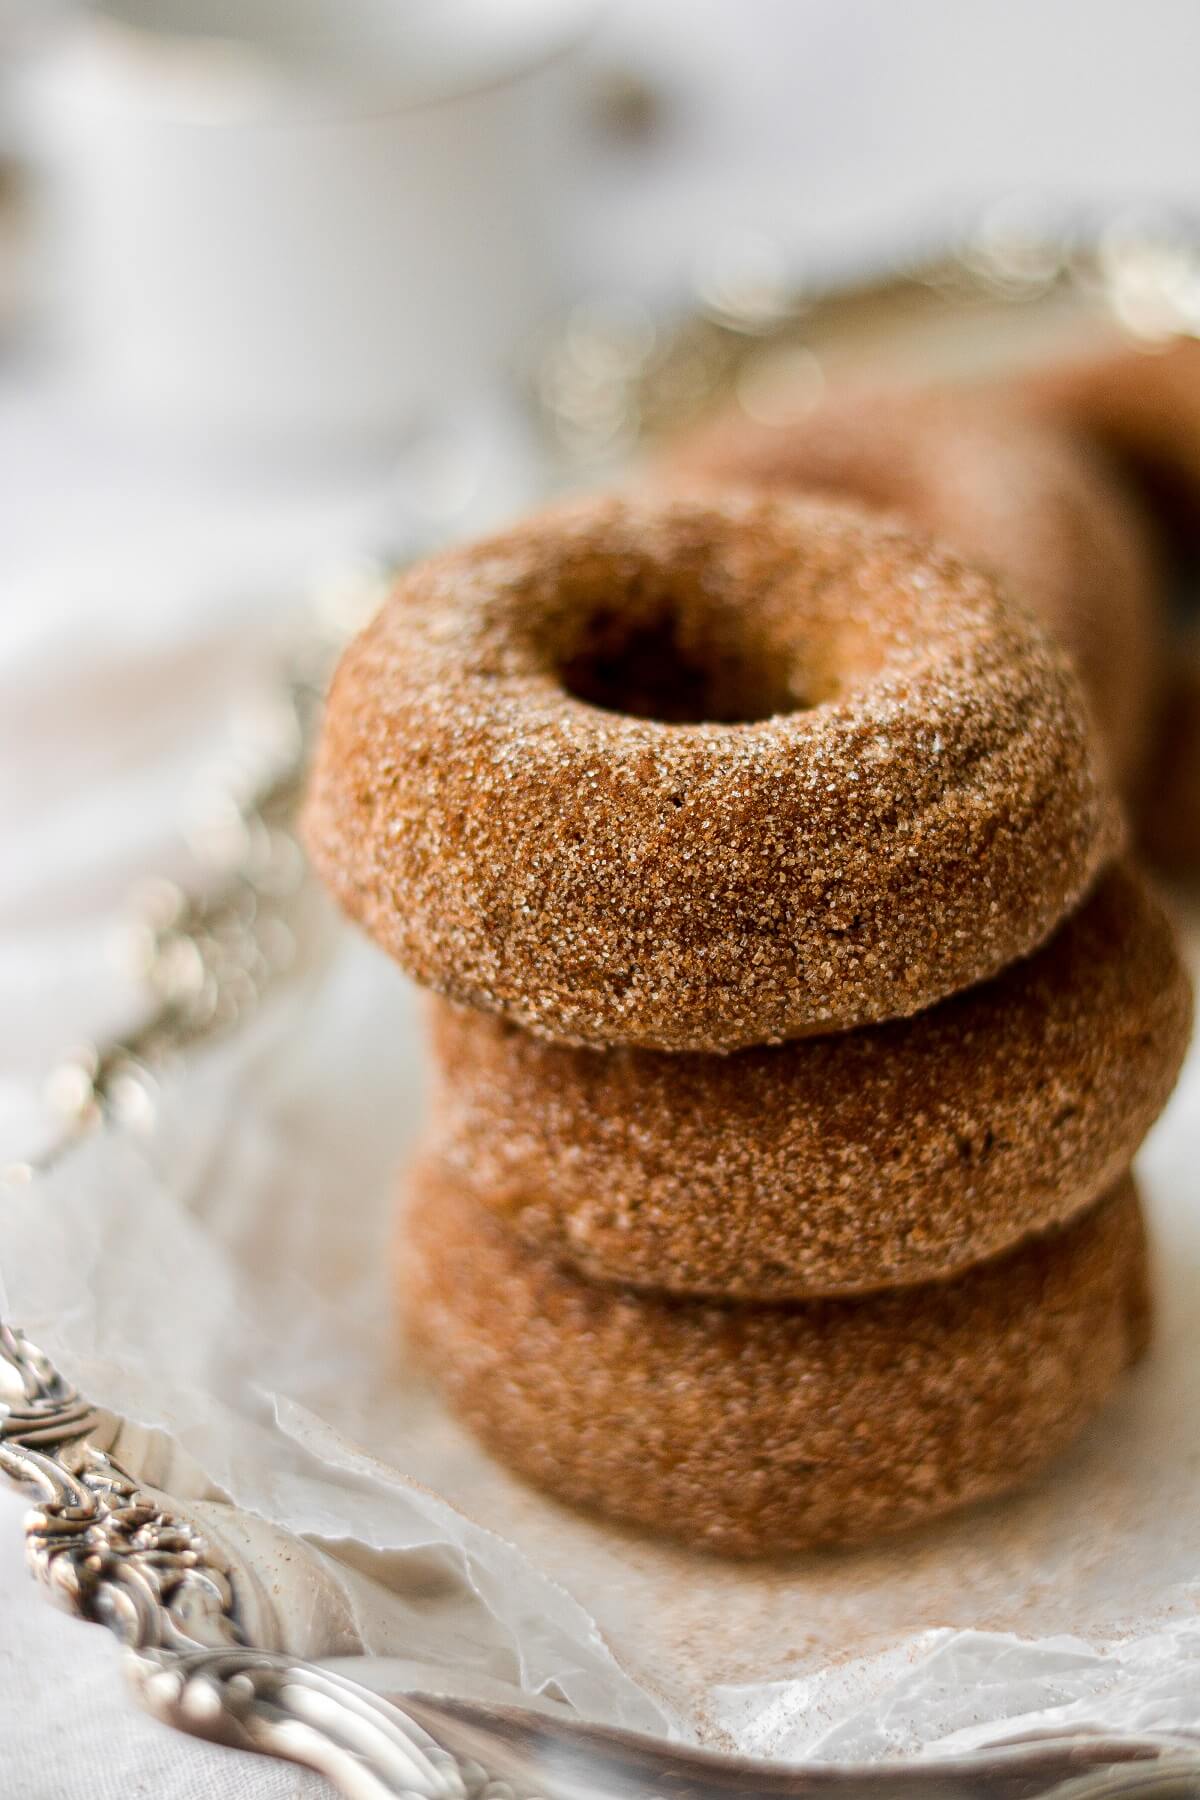 Pumpkin donuts, coated in cinnamon sugar, stacked on a silver plate.